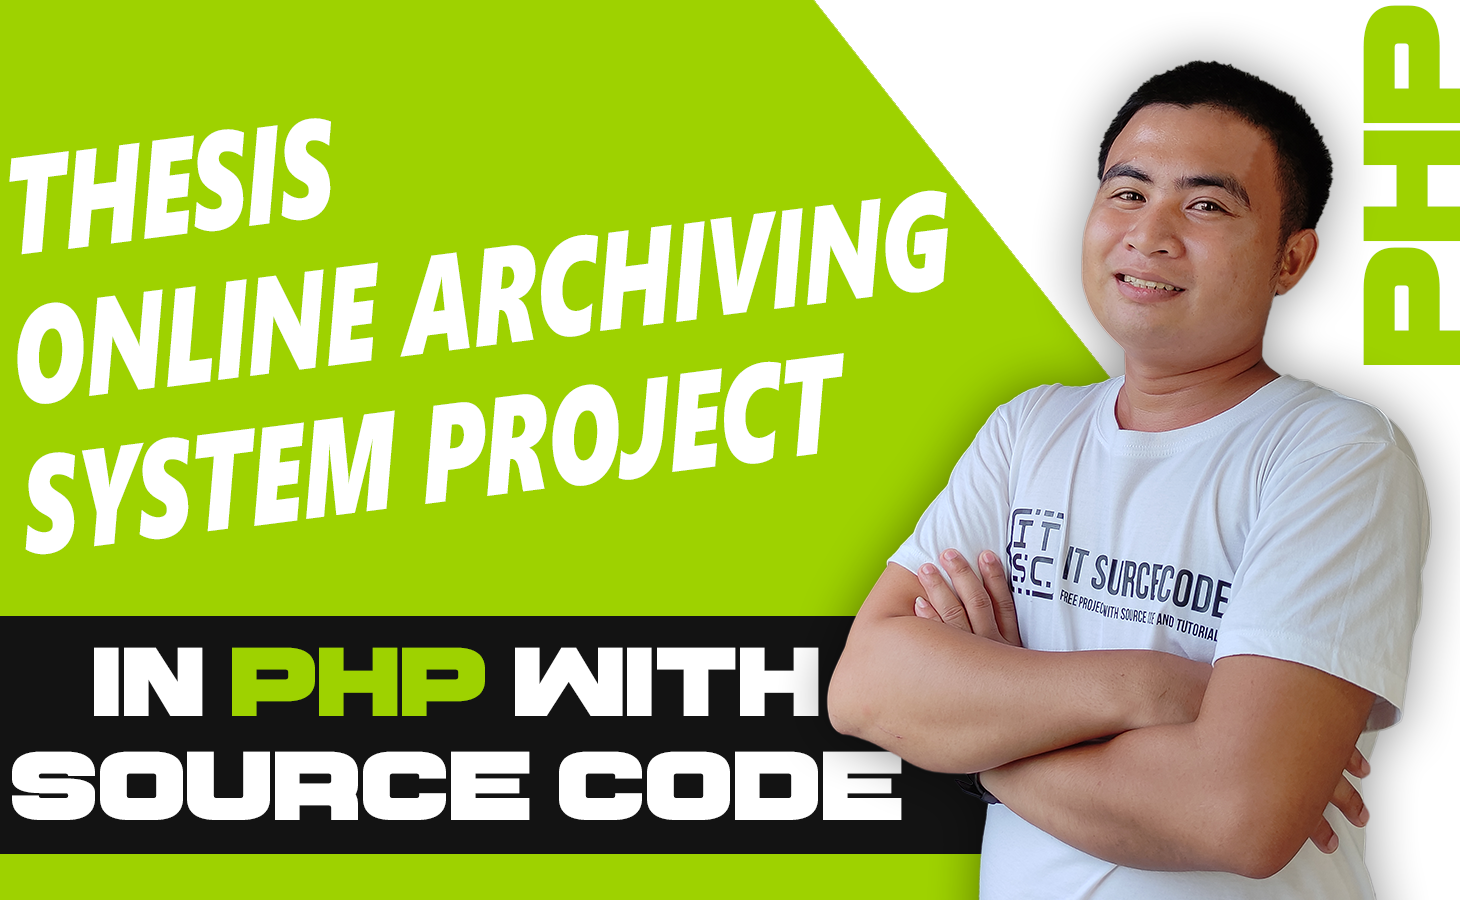 Online Archiving System Using PHP With Source Code